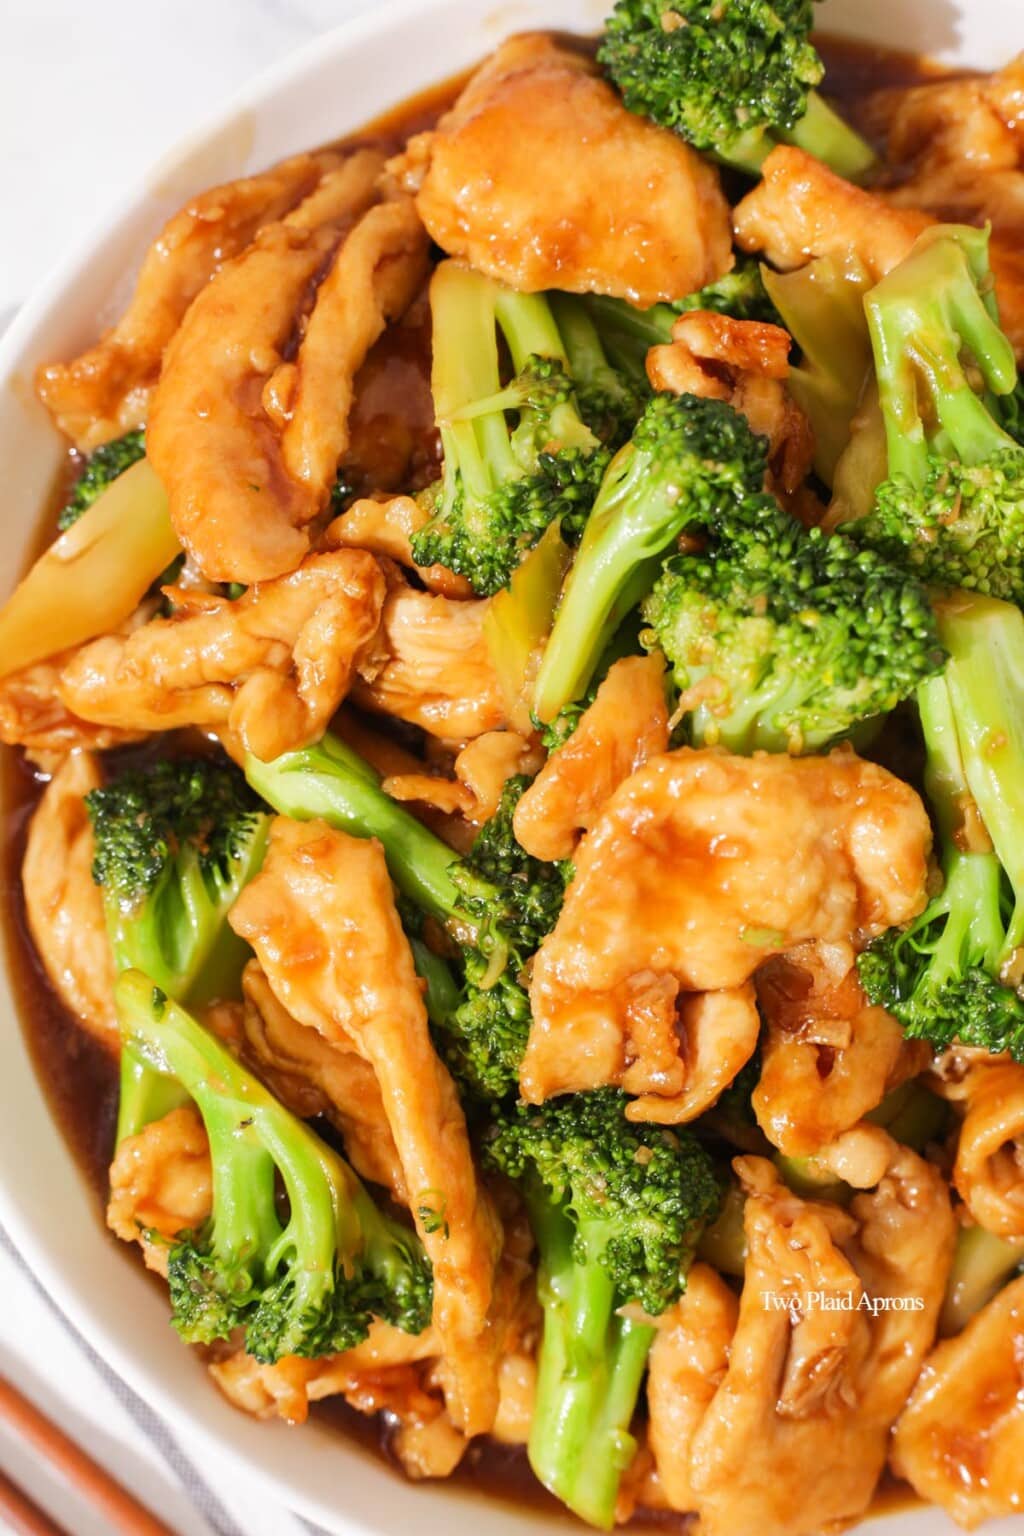 Chinese Chicken and Broccoli | Two Plaid Aprons